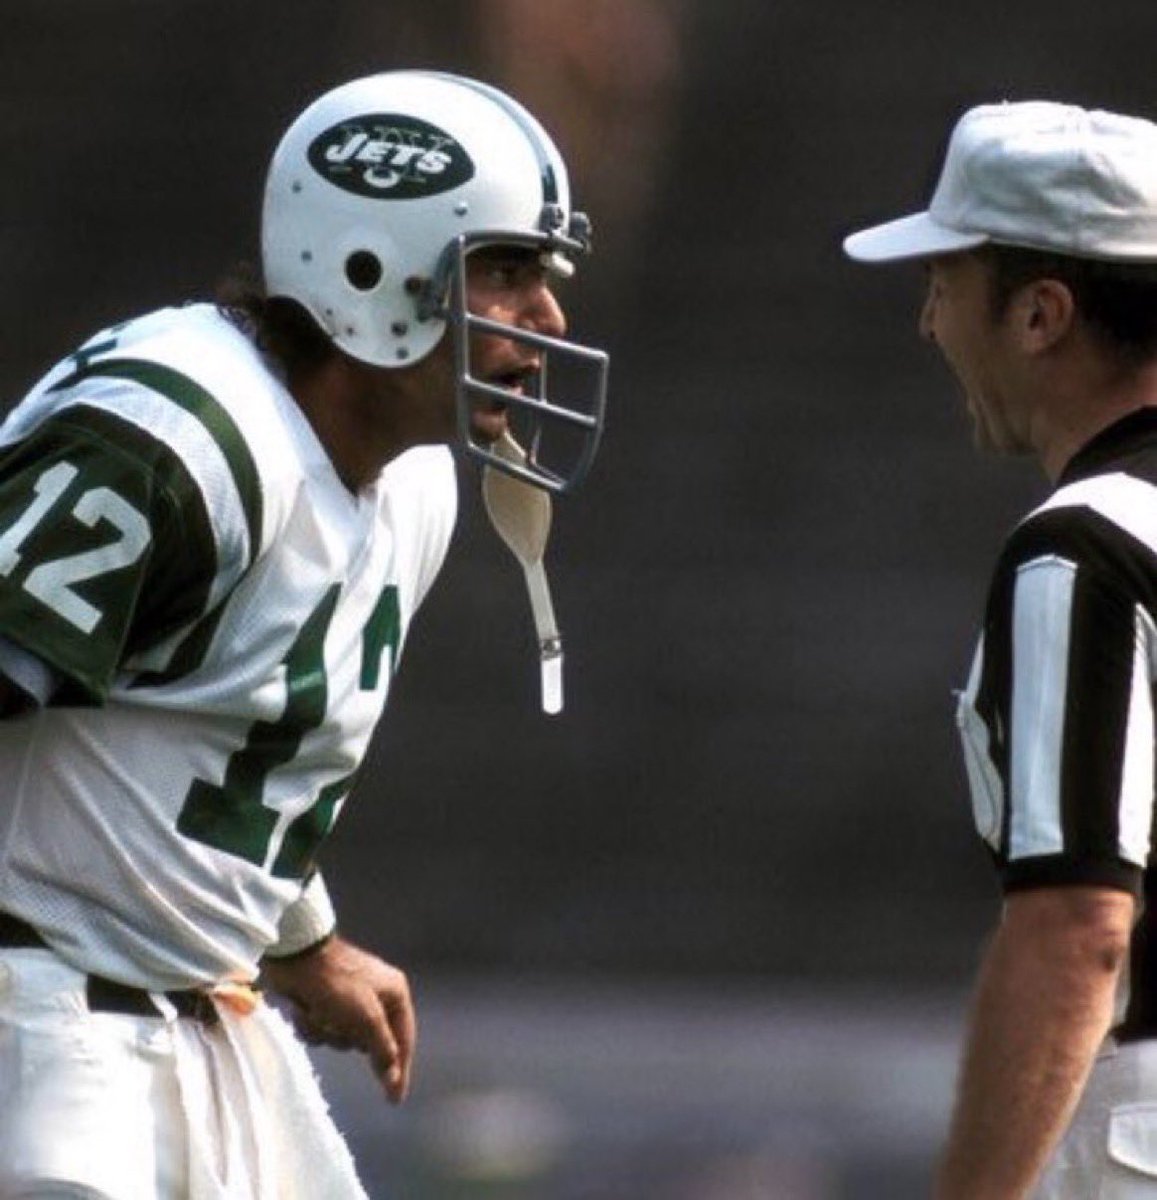 Joe Namath was stunned in 1975 when he became the first NFL player to be penalized 15 yards for unnecessary pimping. Namath strenuously objected to the call on the grounds that pimping is always necessary.